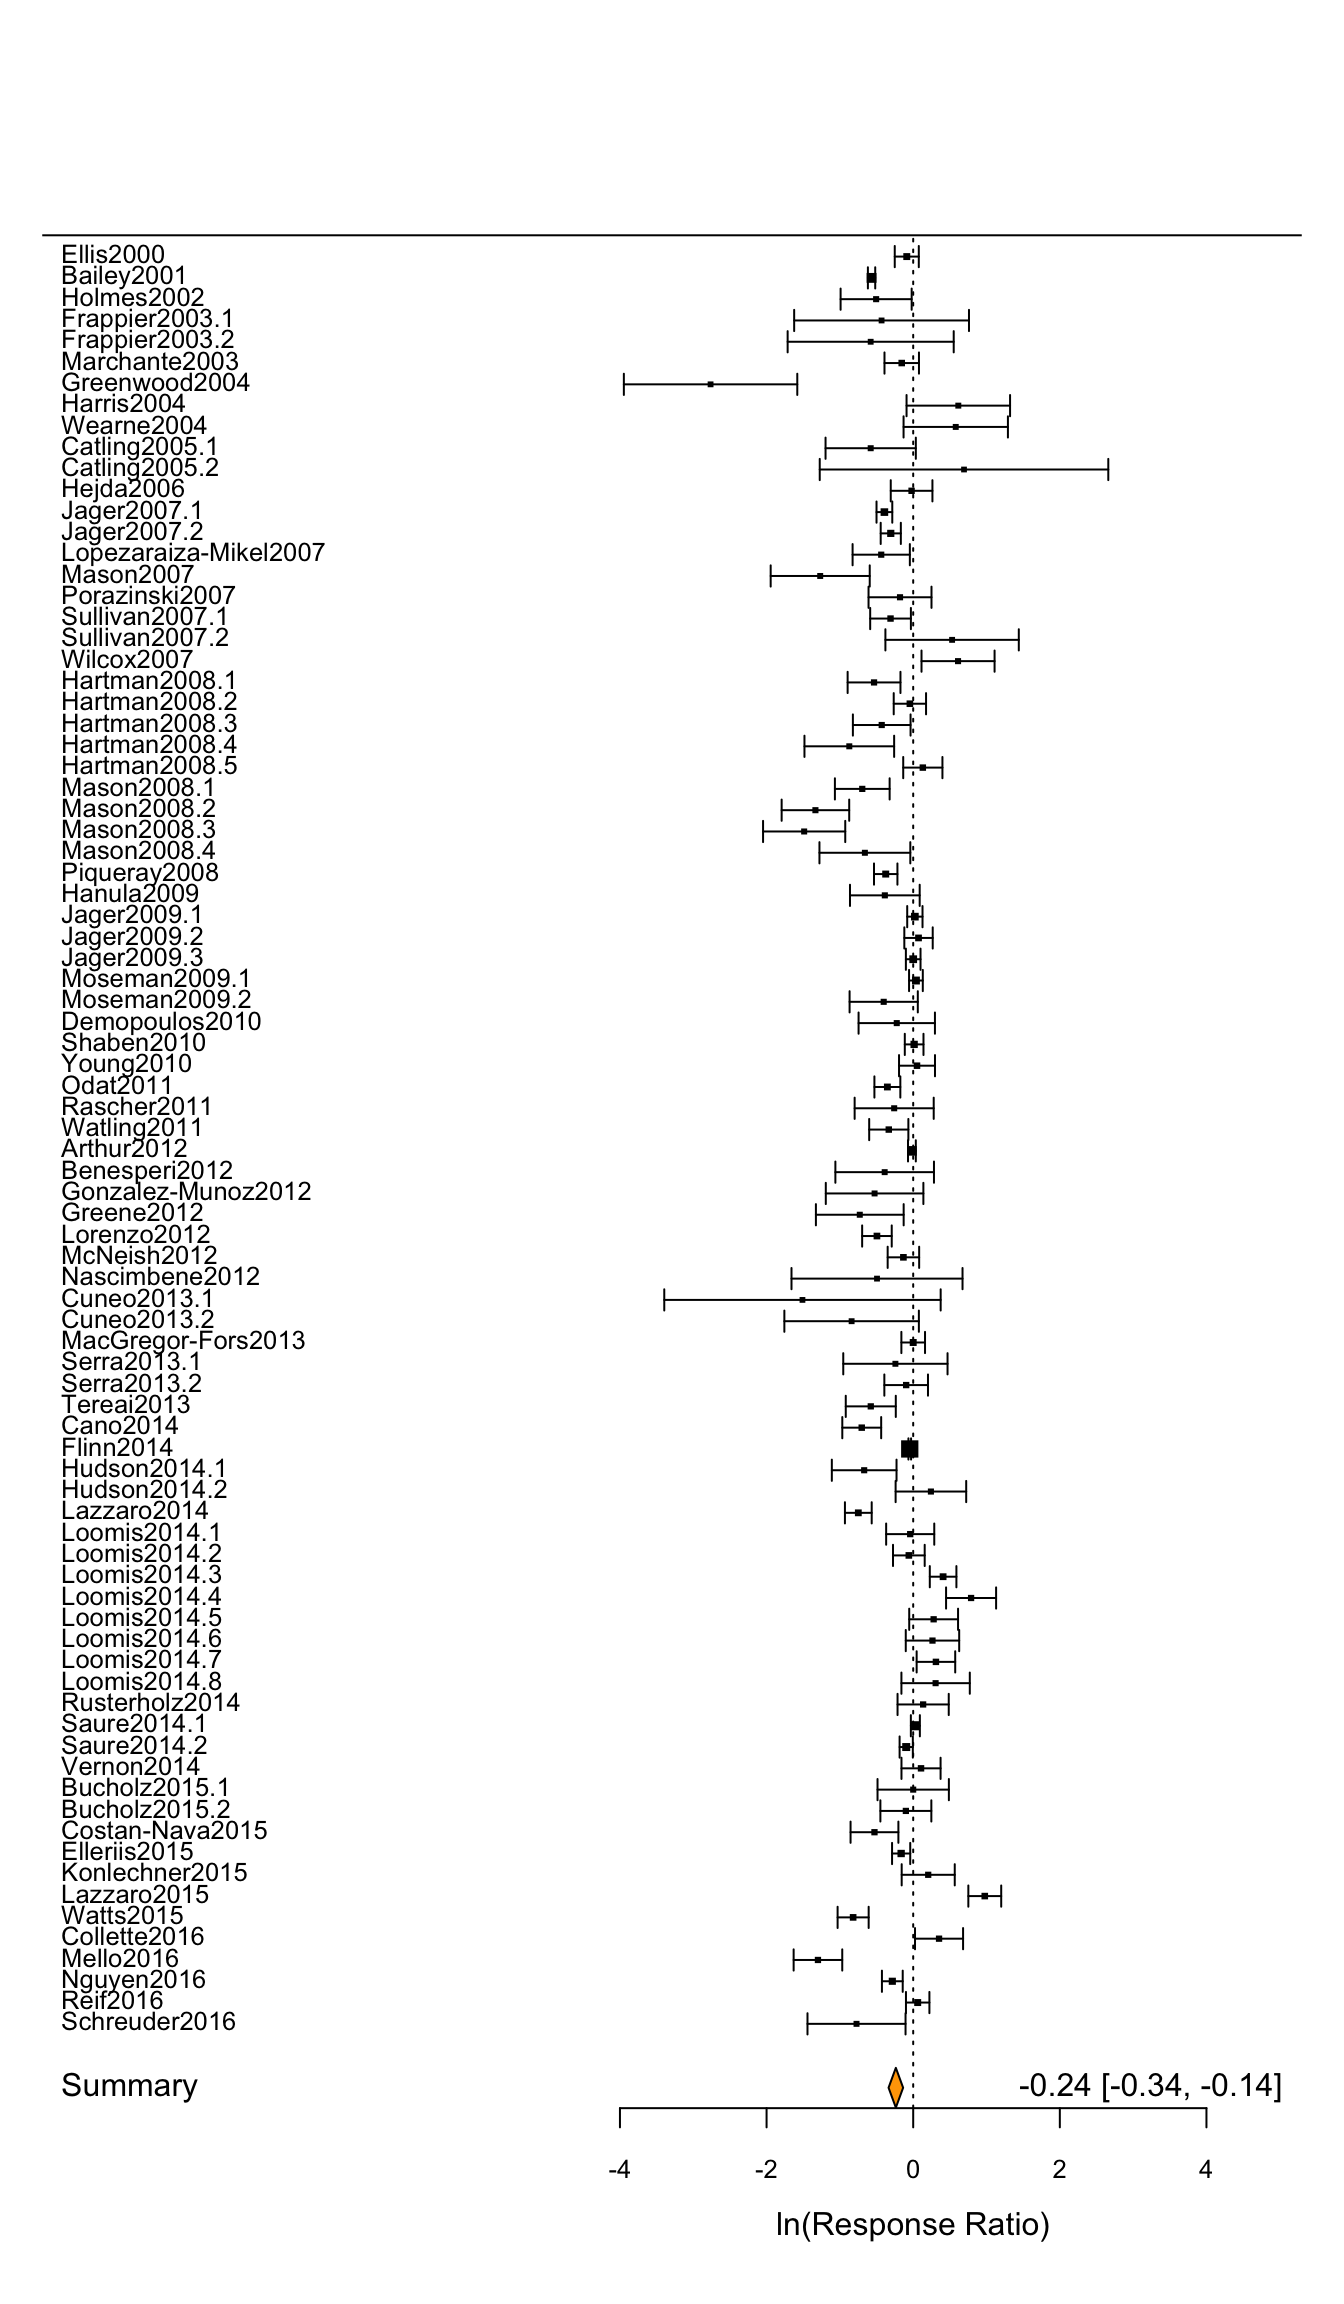 A forest plot displaying the results of our random effects meta-analysis